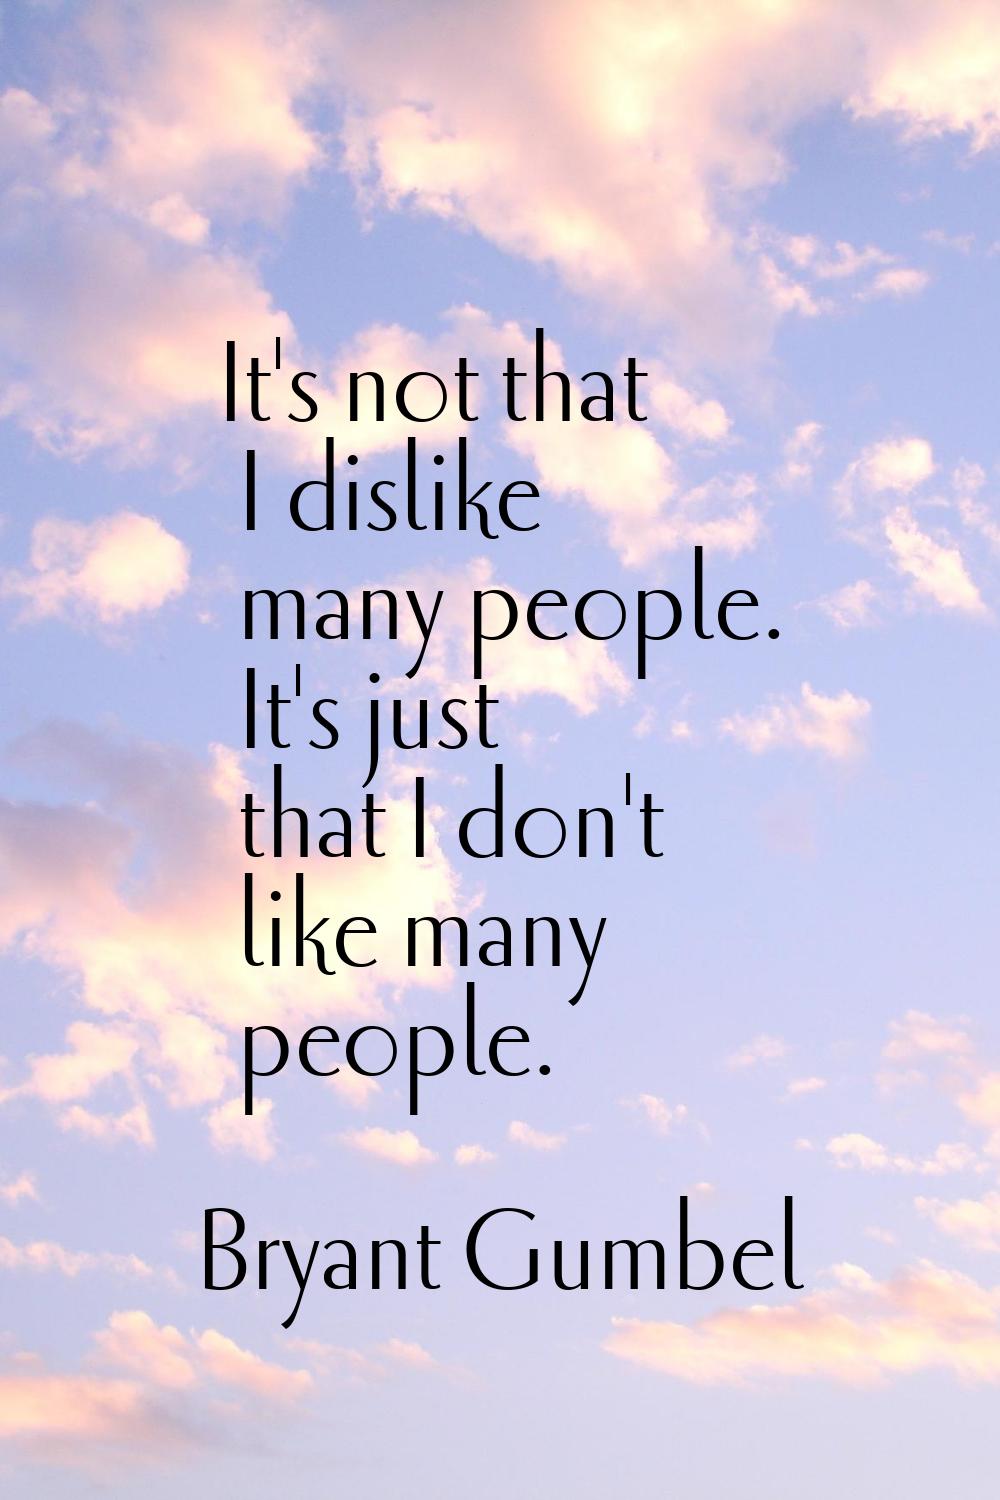 It's not that I dislike many people. It's just that I don't like many people.